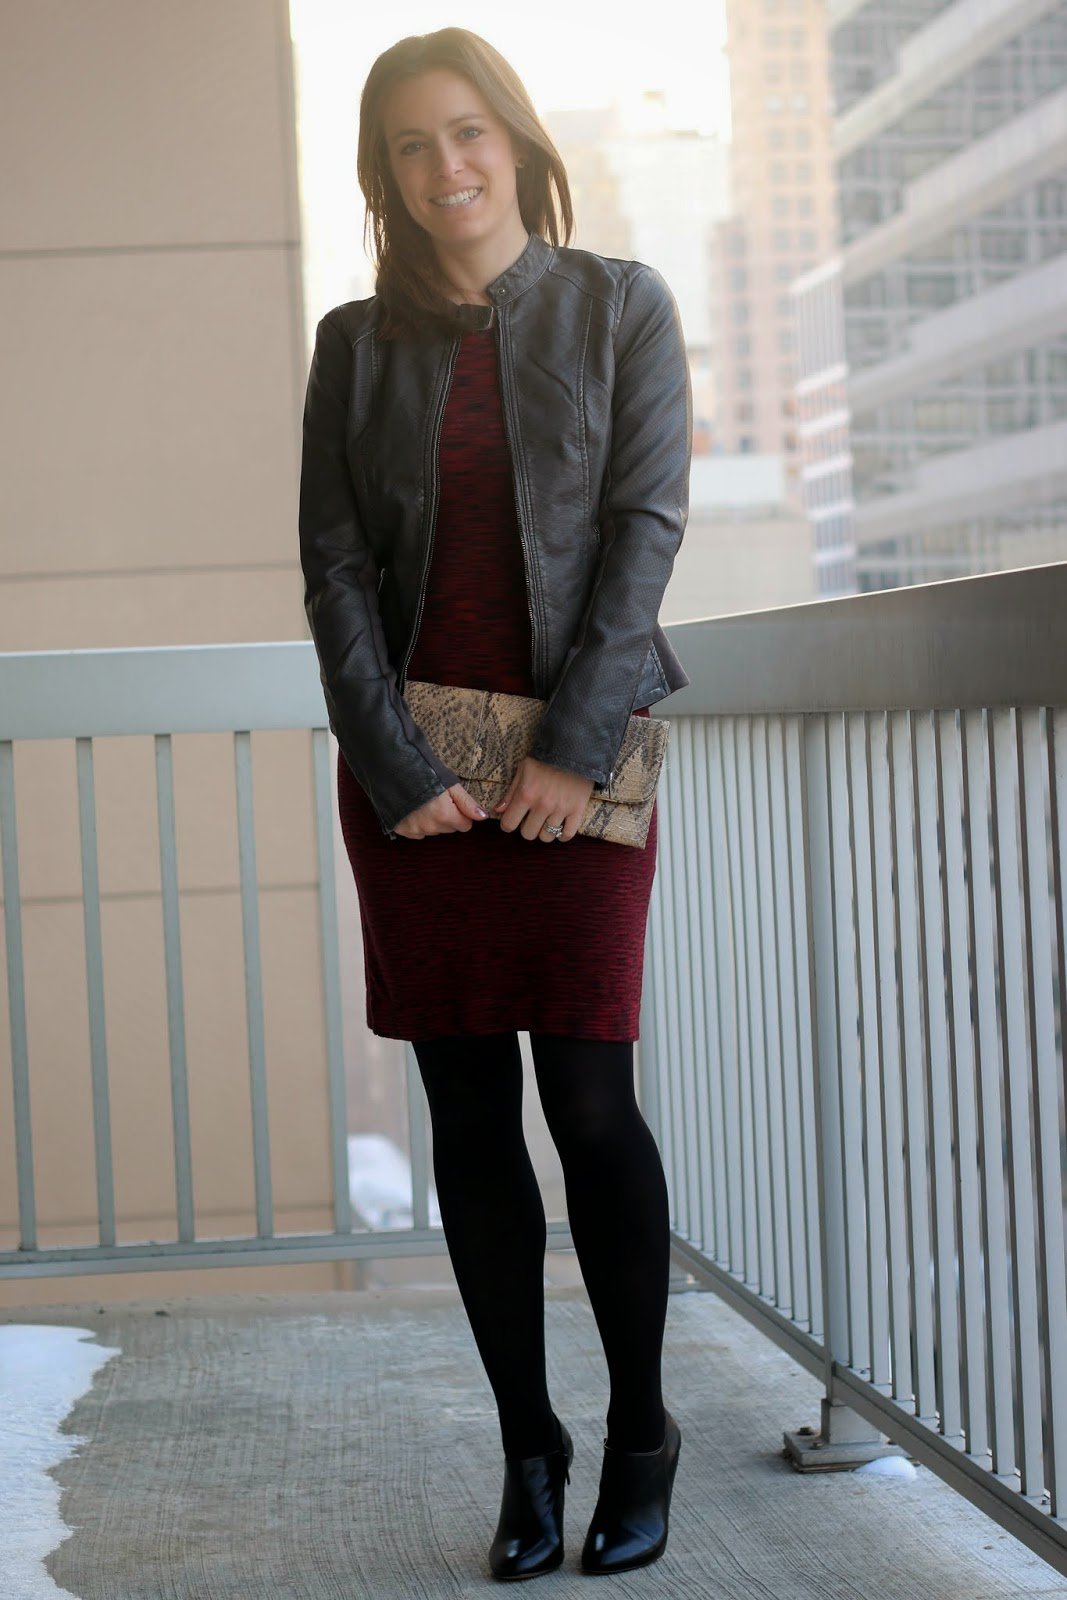 FashionablyEmployed.com | Valentine's Day Style: Desk to Dinner Date | Red sweater dress, black tights and booties, gray moto jacket or gray blazer | work to weekend style